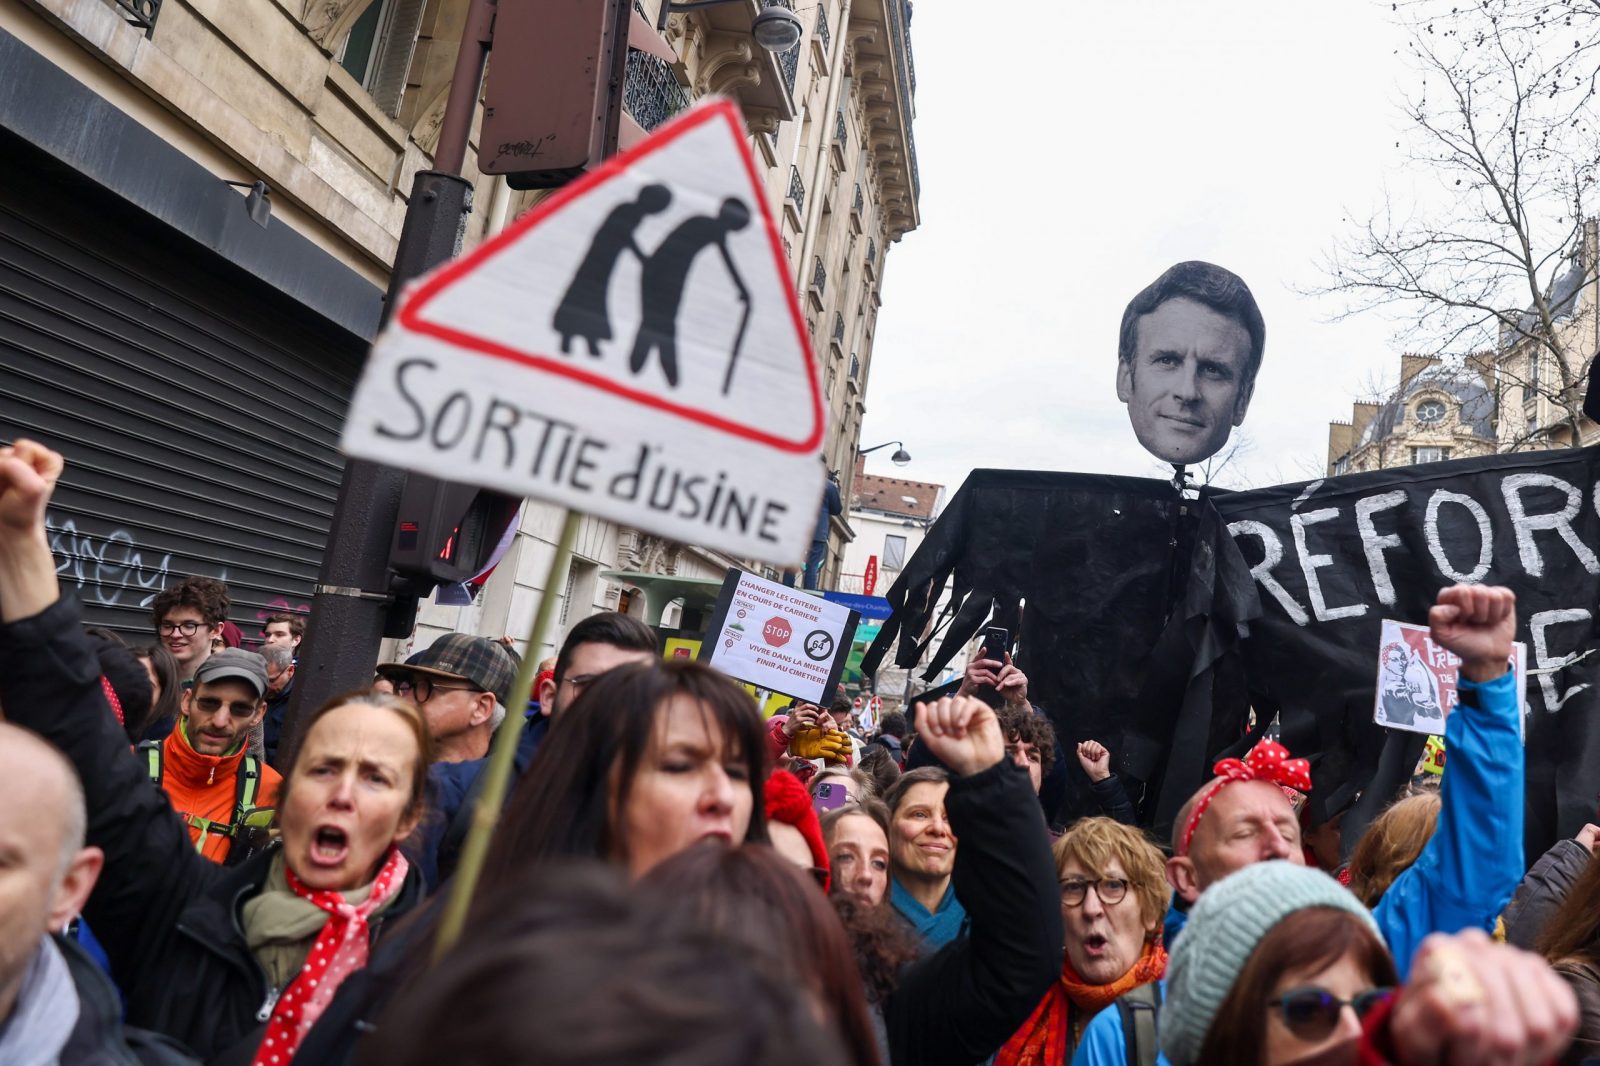 epa10507561 Protesters hold a banner showing French President Macron's face, during a protest against the French government's planned reform of the pension system, in Paris, France, 07 March 2023. The French government plans to delay the minimum retirement age from 62 to 64, until 2030.  EPA/MOHAMMED BADRA